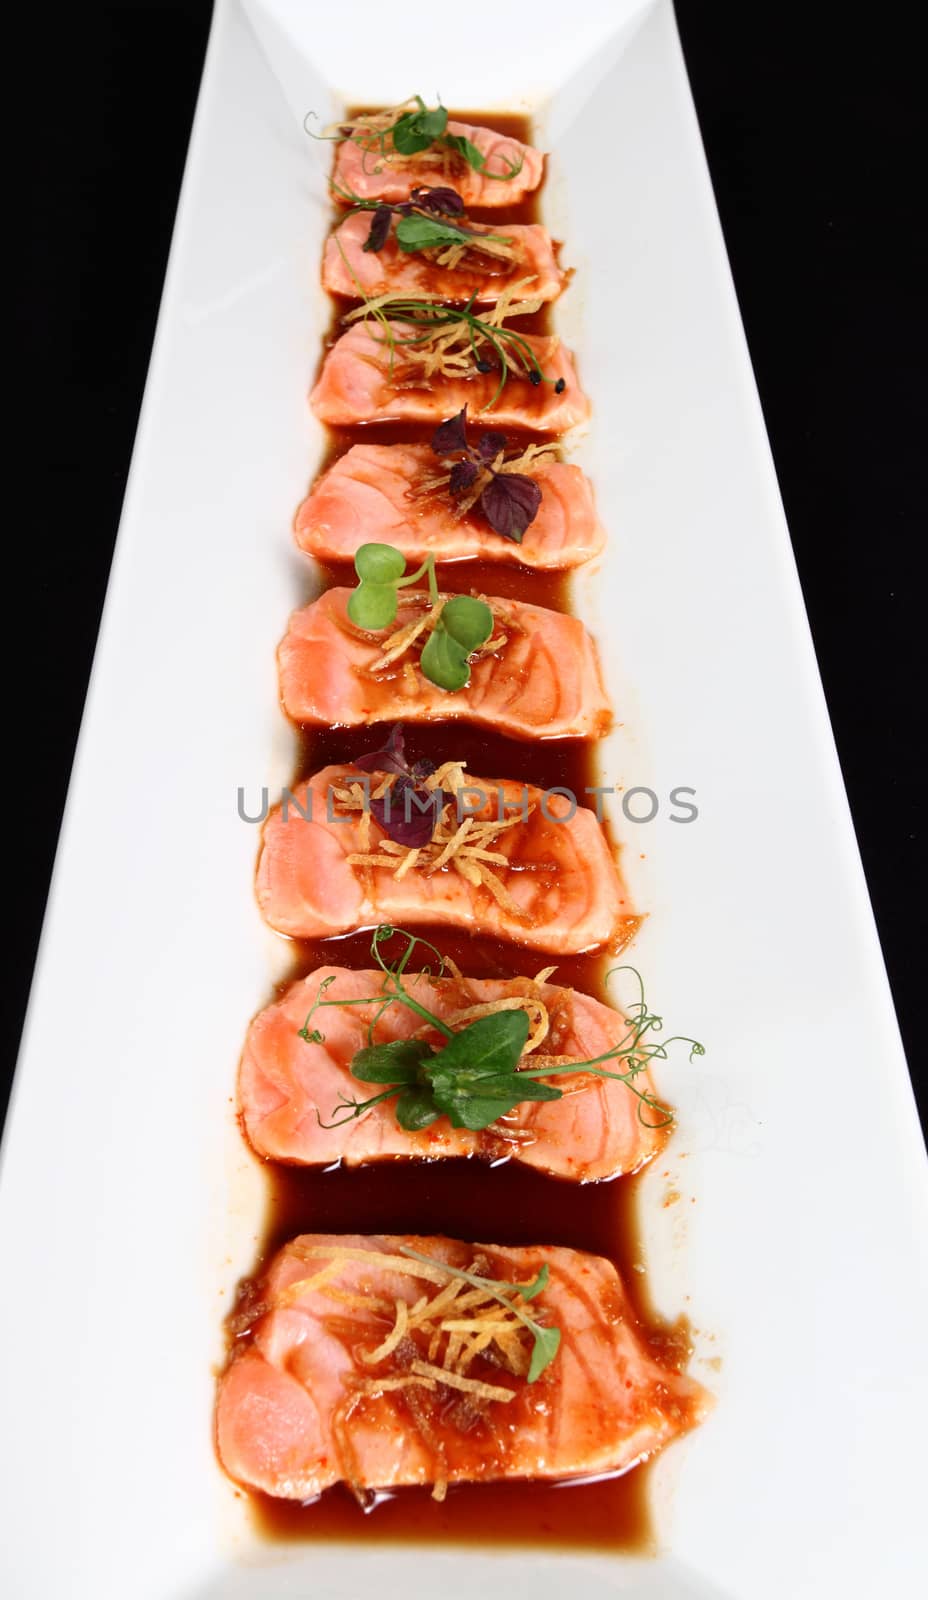 salmon steak with sauce by diecidodici